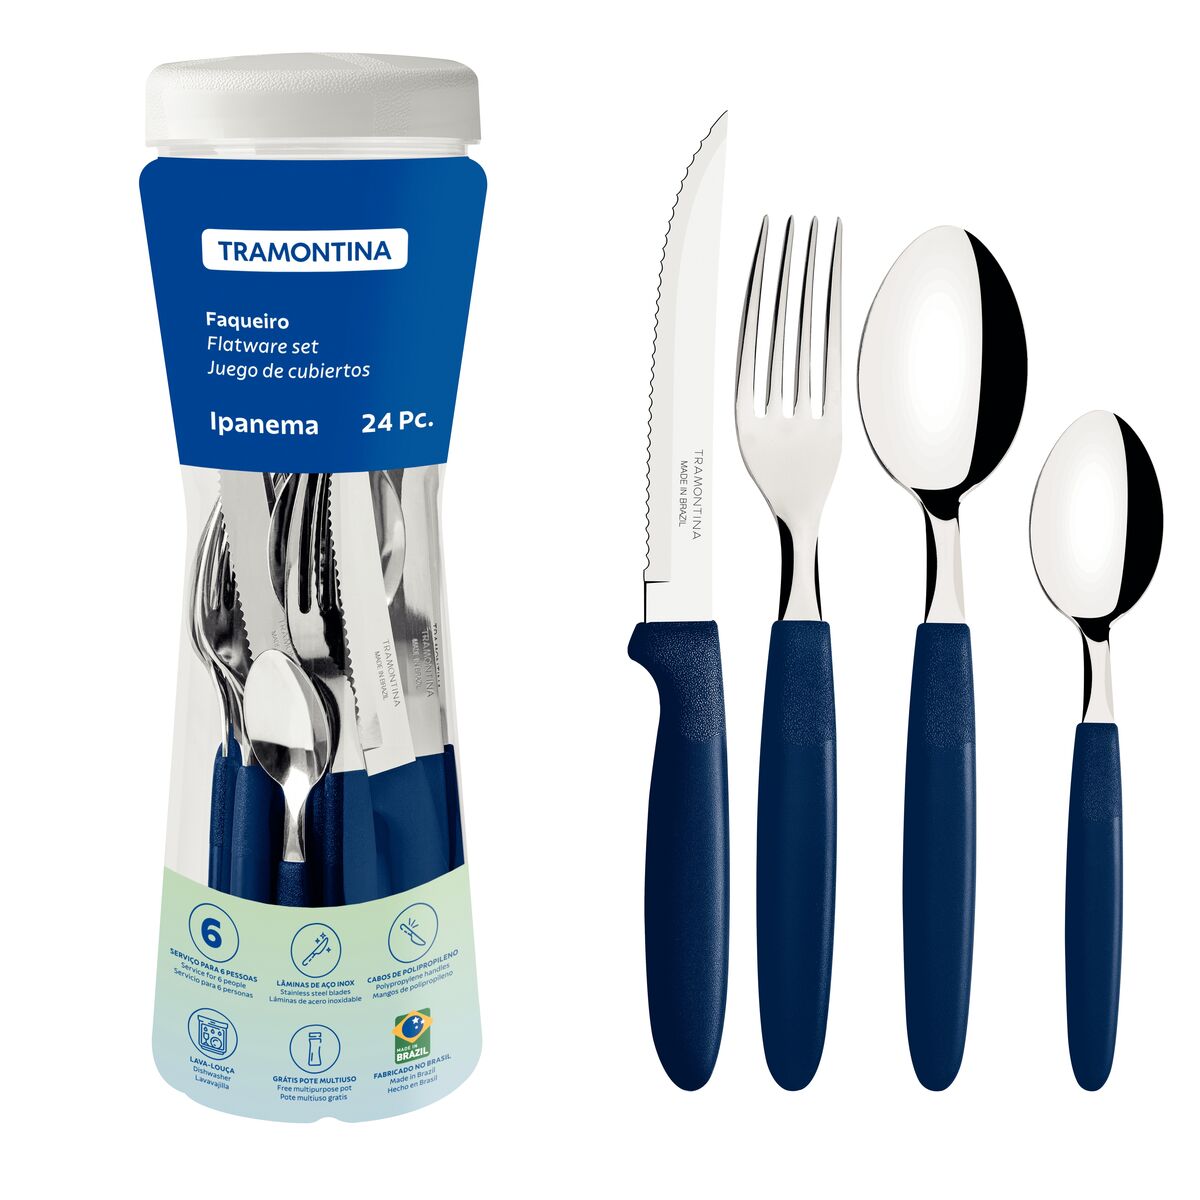 Tramontina Ipanema stainless steel flatware set with blue polypropylene handles and plastic container, 24 pcs